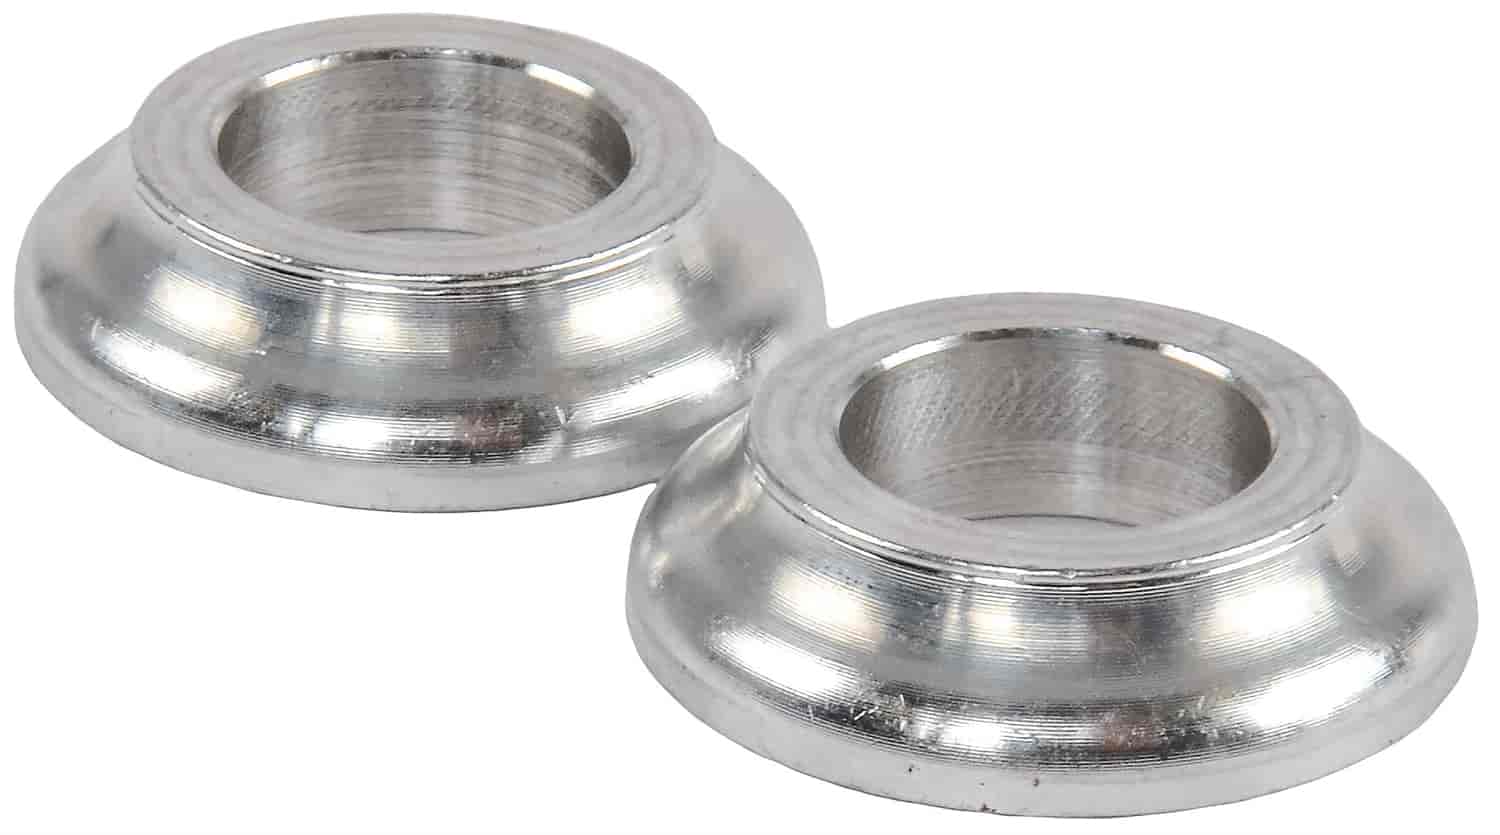 Aluminum Tapered Rod End Spacers 1/2 in. ID (Bolt Size) x 1/4 in. L